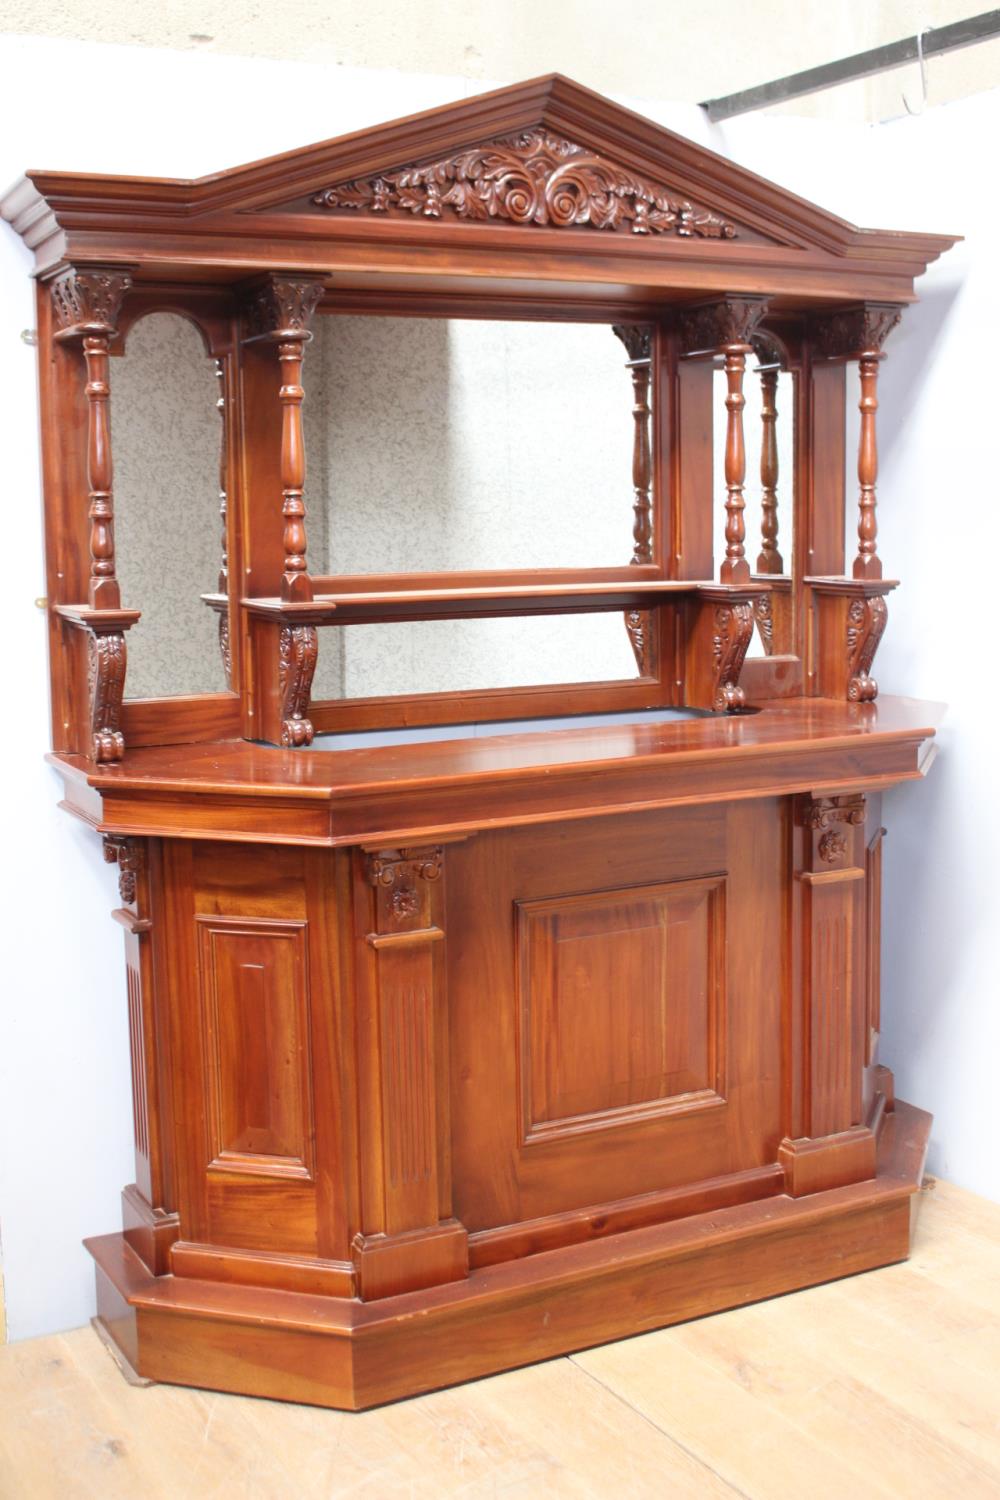 Mahogany bar back with mirror and bar counter {Back - 120 cm H x 174 cm W x 24 cm D and Counter